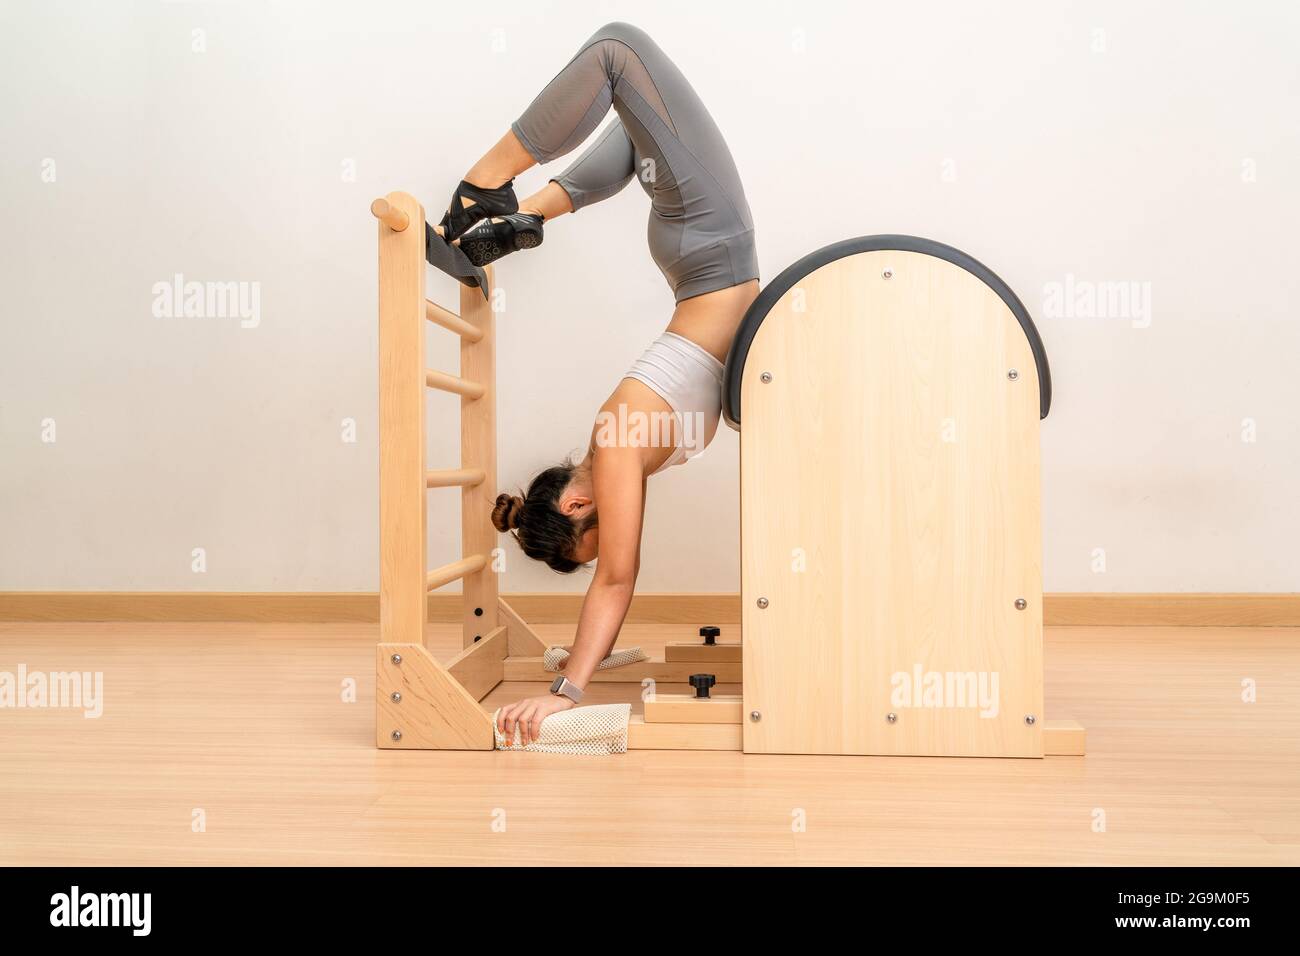 Young Asian Woman Working on Pilates Ladder Barrel Machine during